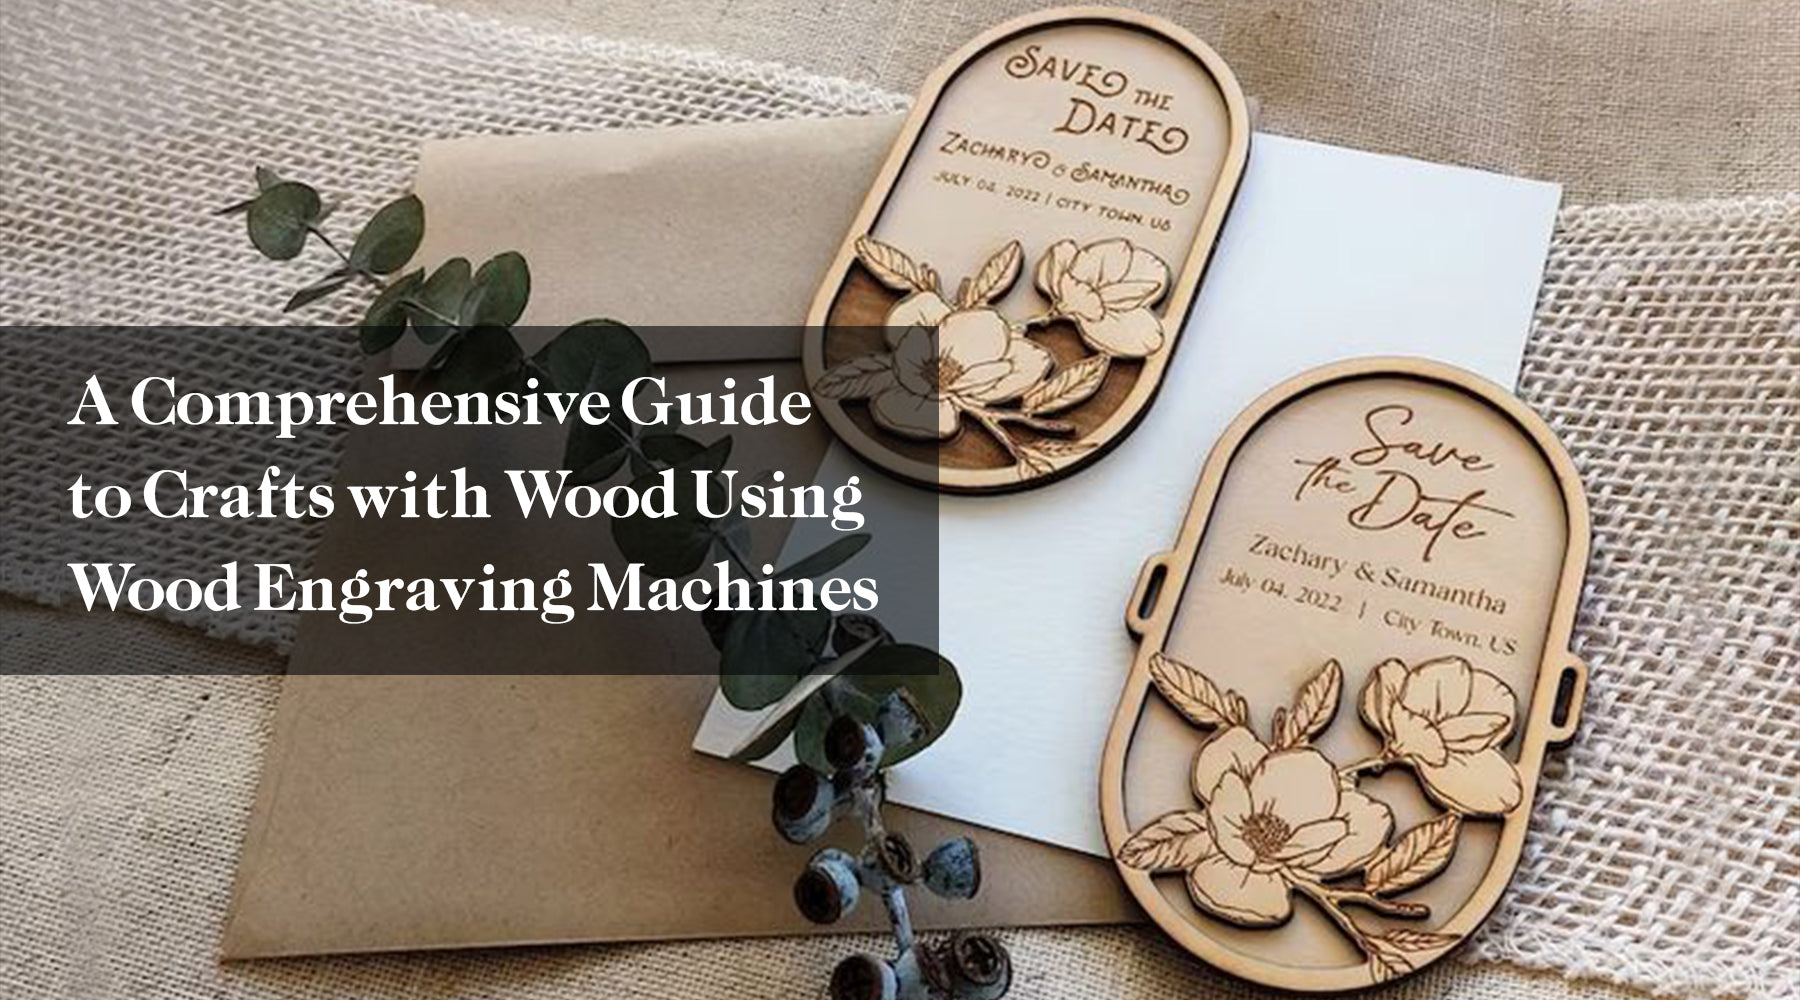 A Comprehensive Guide to Crafts with Wood Using Wood Engraving Machines